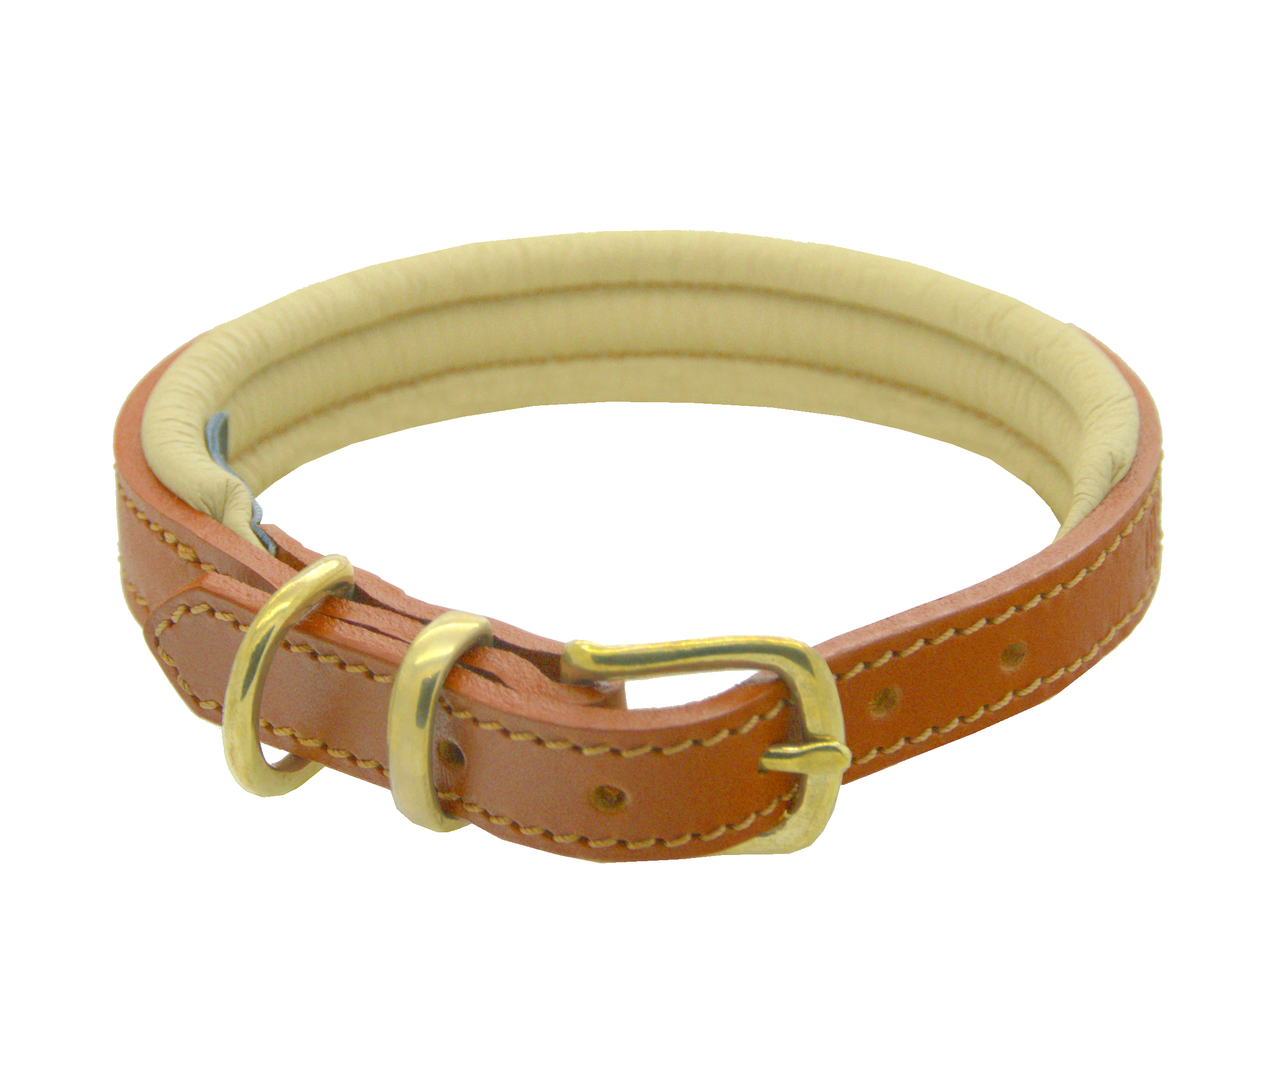 D&H Classic Colours Leather dog collar in tan and cream